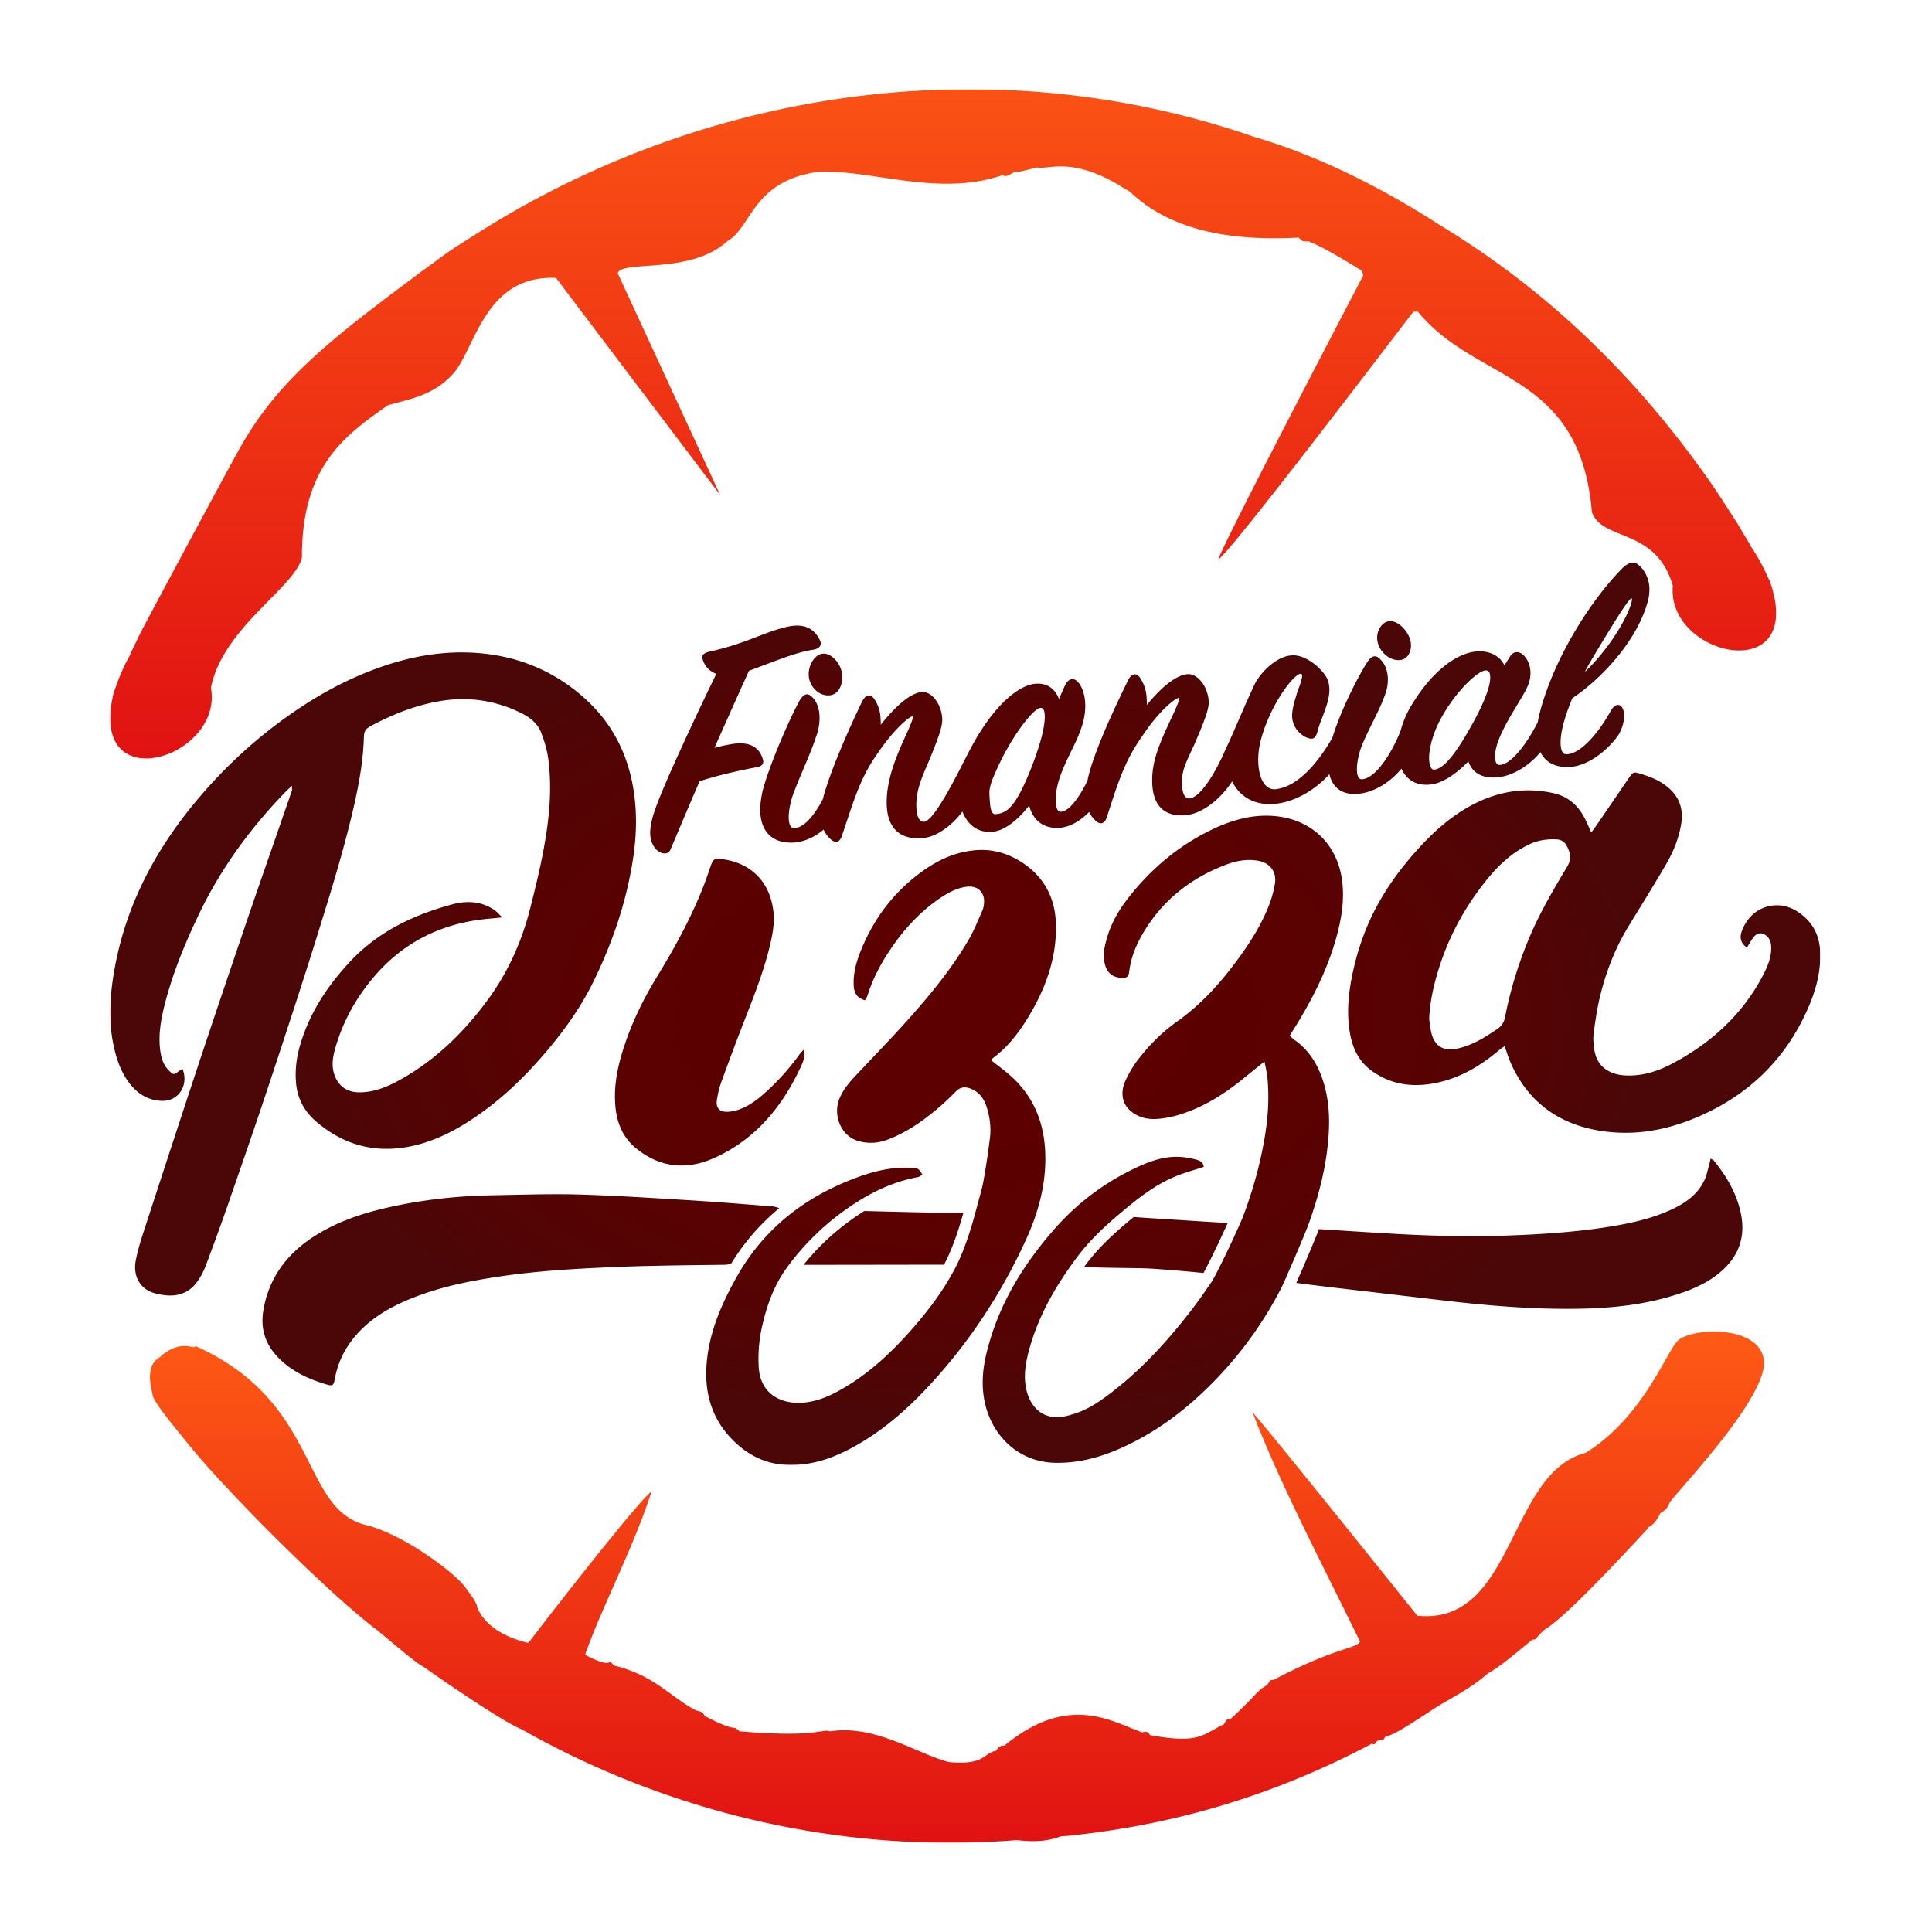 Financial Pizza The Advisors talk about annuities, reverse mortgages, sequence of returns and more.